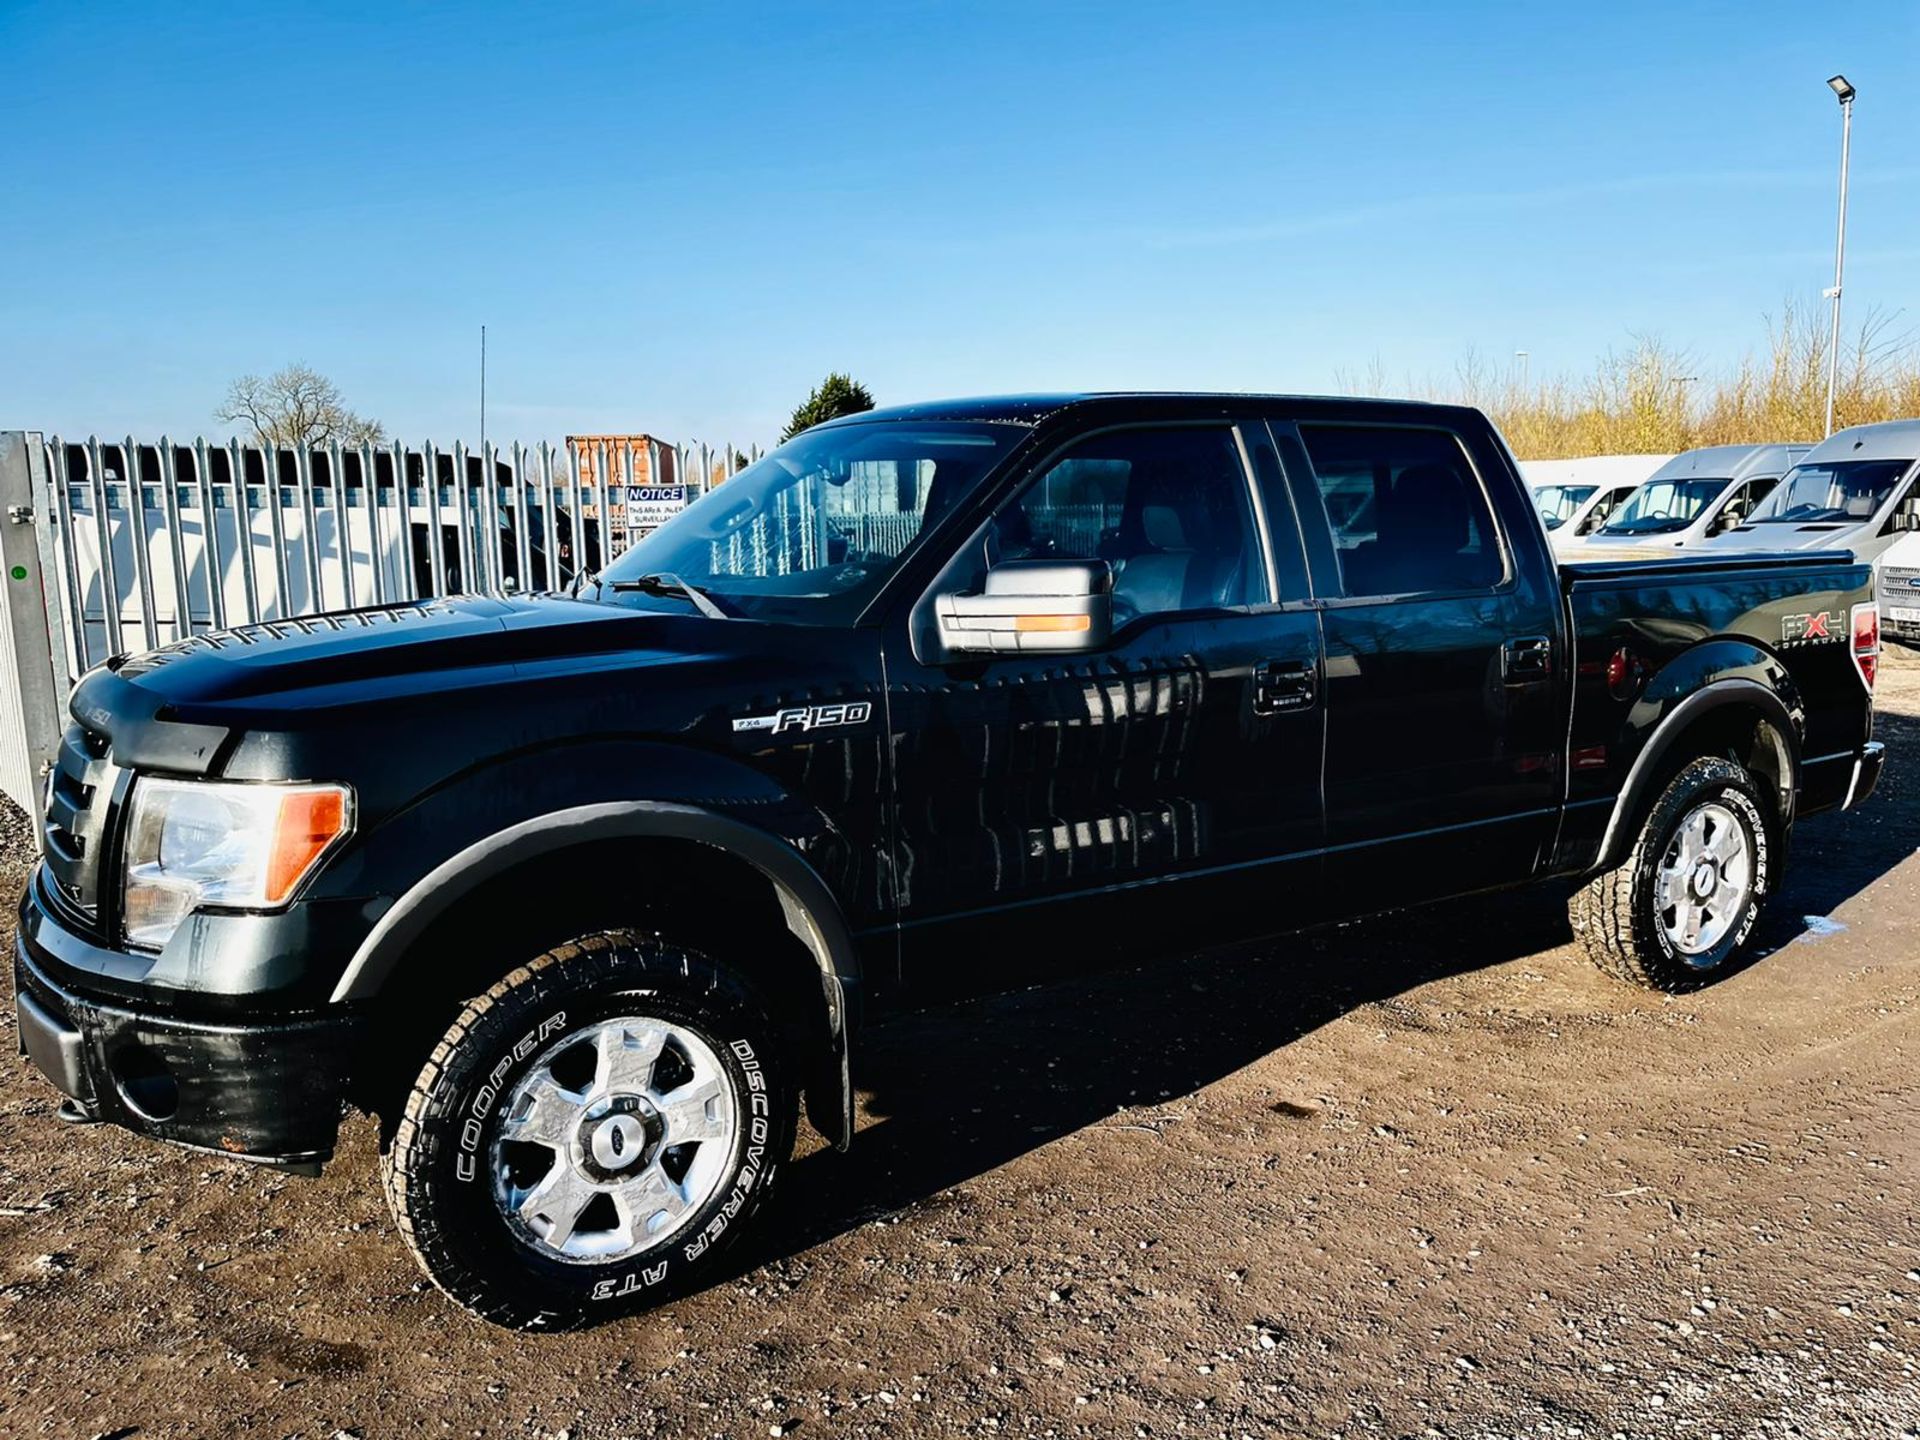 Ford F-150 5.4L V8 SuperCab 4WD FX4 Edition '2010 Year' Colour Coded Package - Top Spec - Image 10 of 44